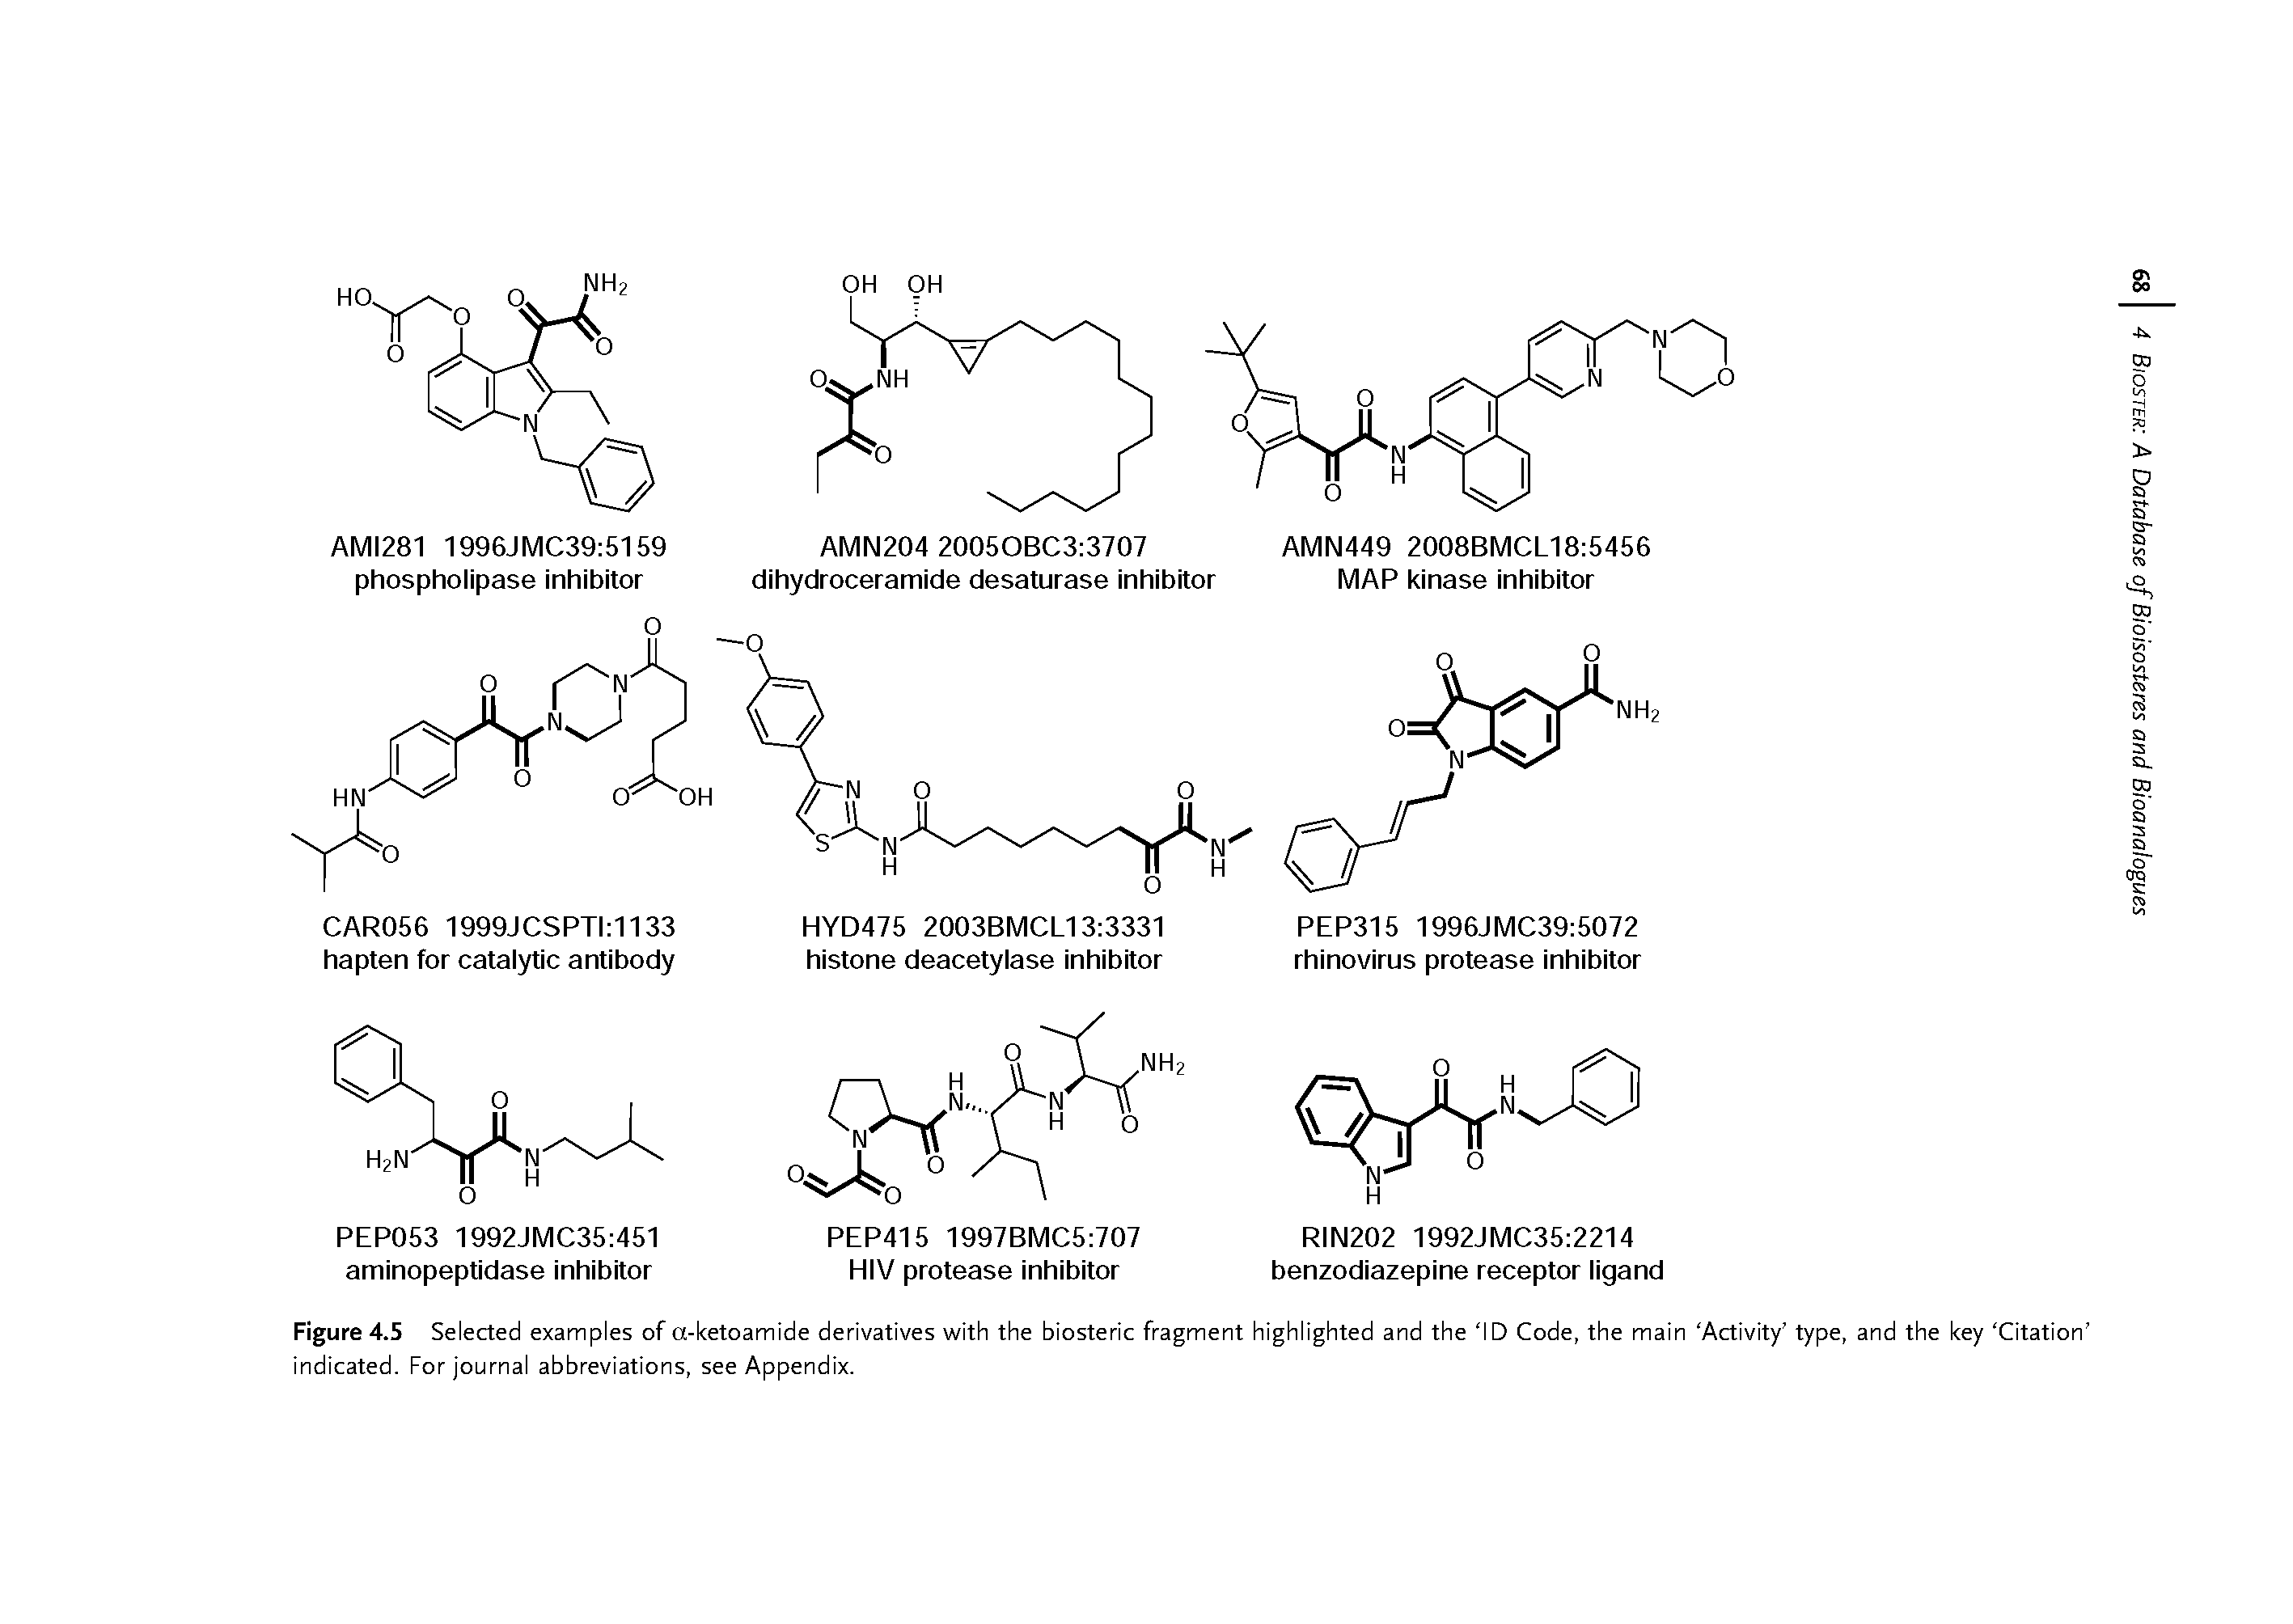 Figure 4.5 Selected examples of a-ketoamide derivatives with the biosteric fragment highlighted and the ID Code, the main Activity type, and the key Citation indicated. For journal abbreviations, see Appendix.